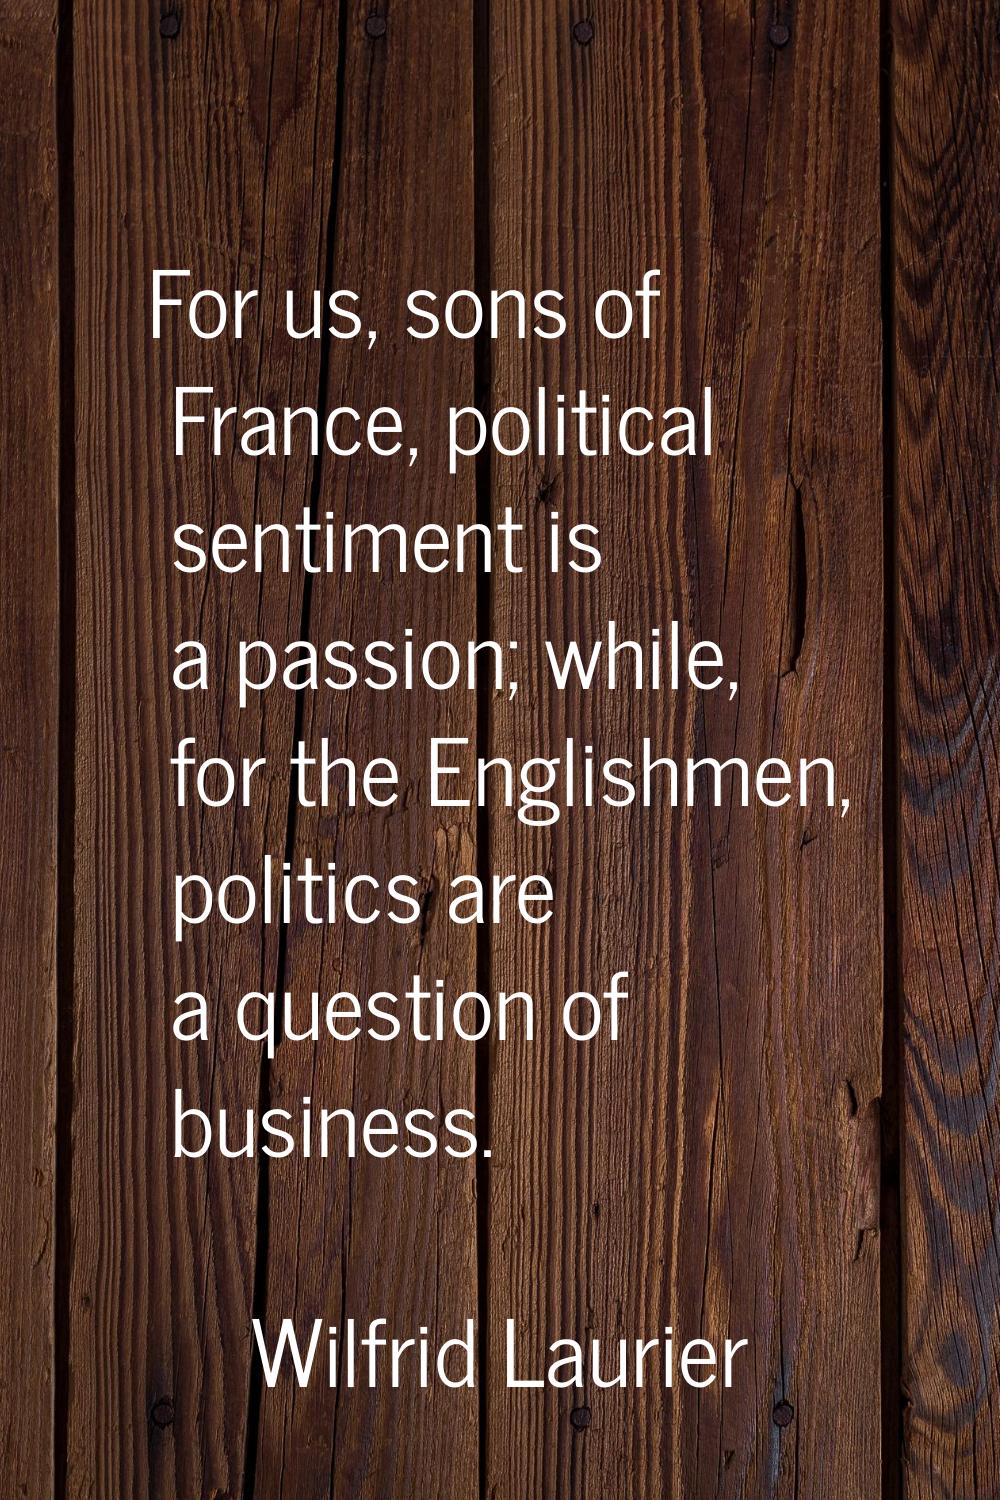 For us, sons of France, political sentiment is a passion; while, for the Englishmen, politics are a